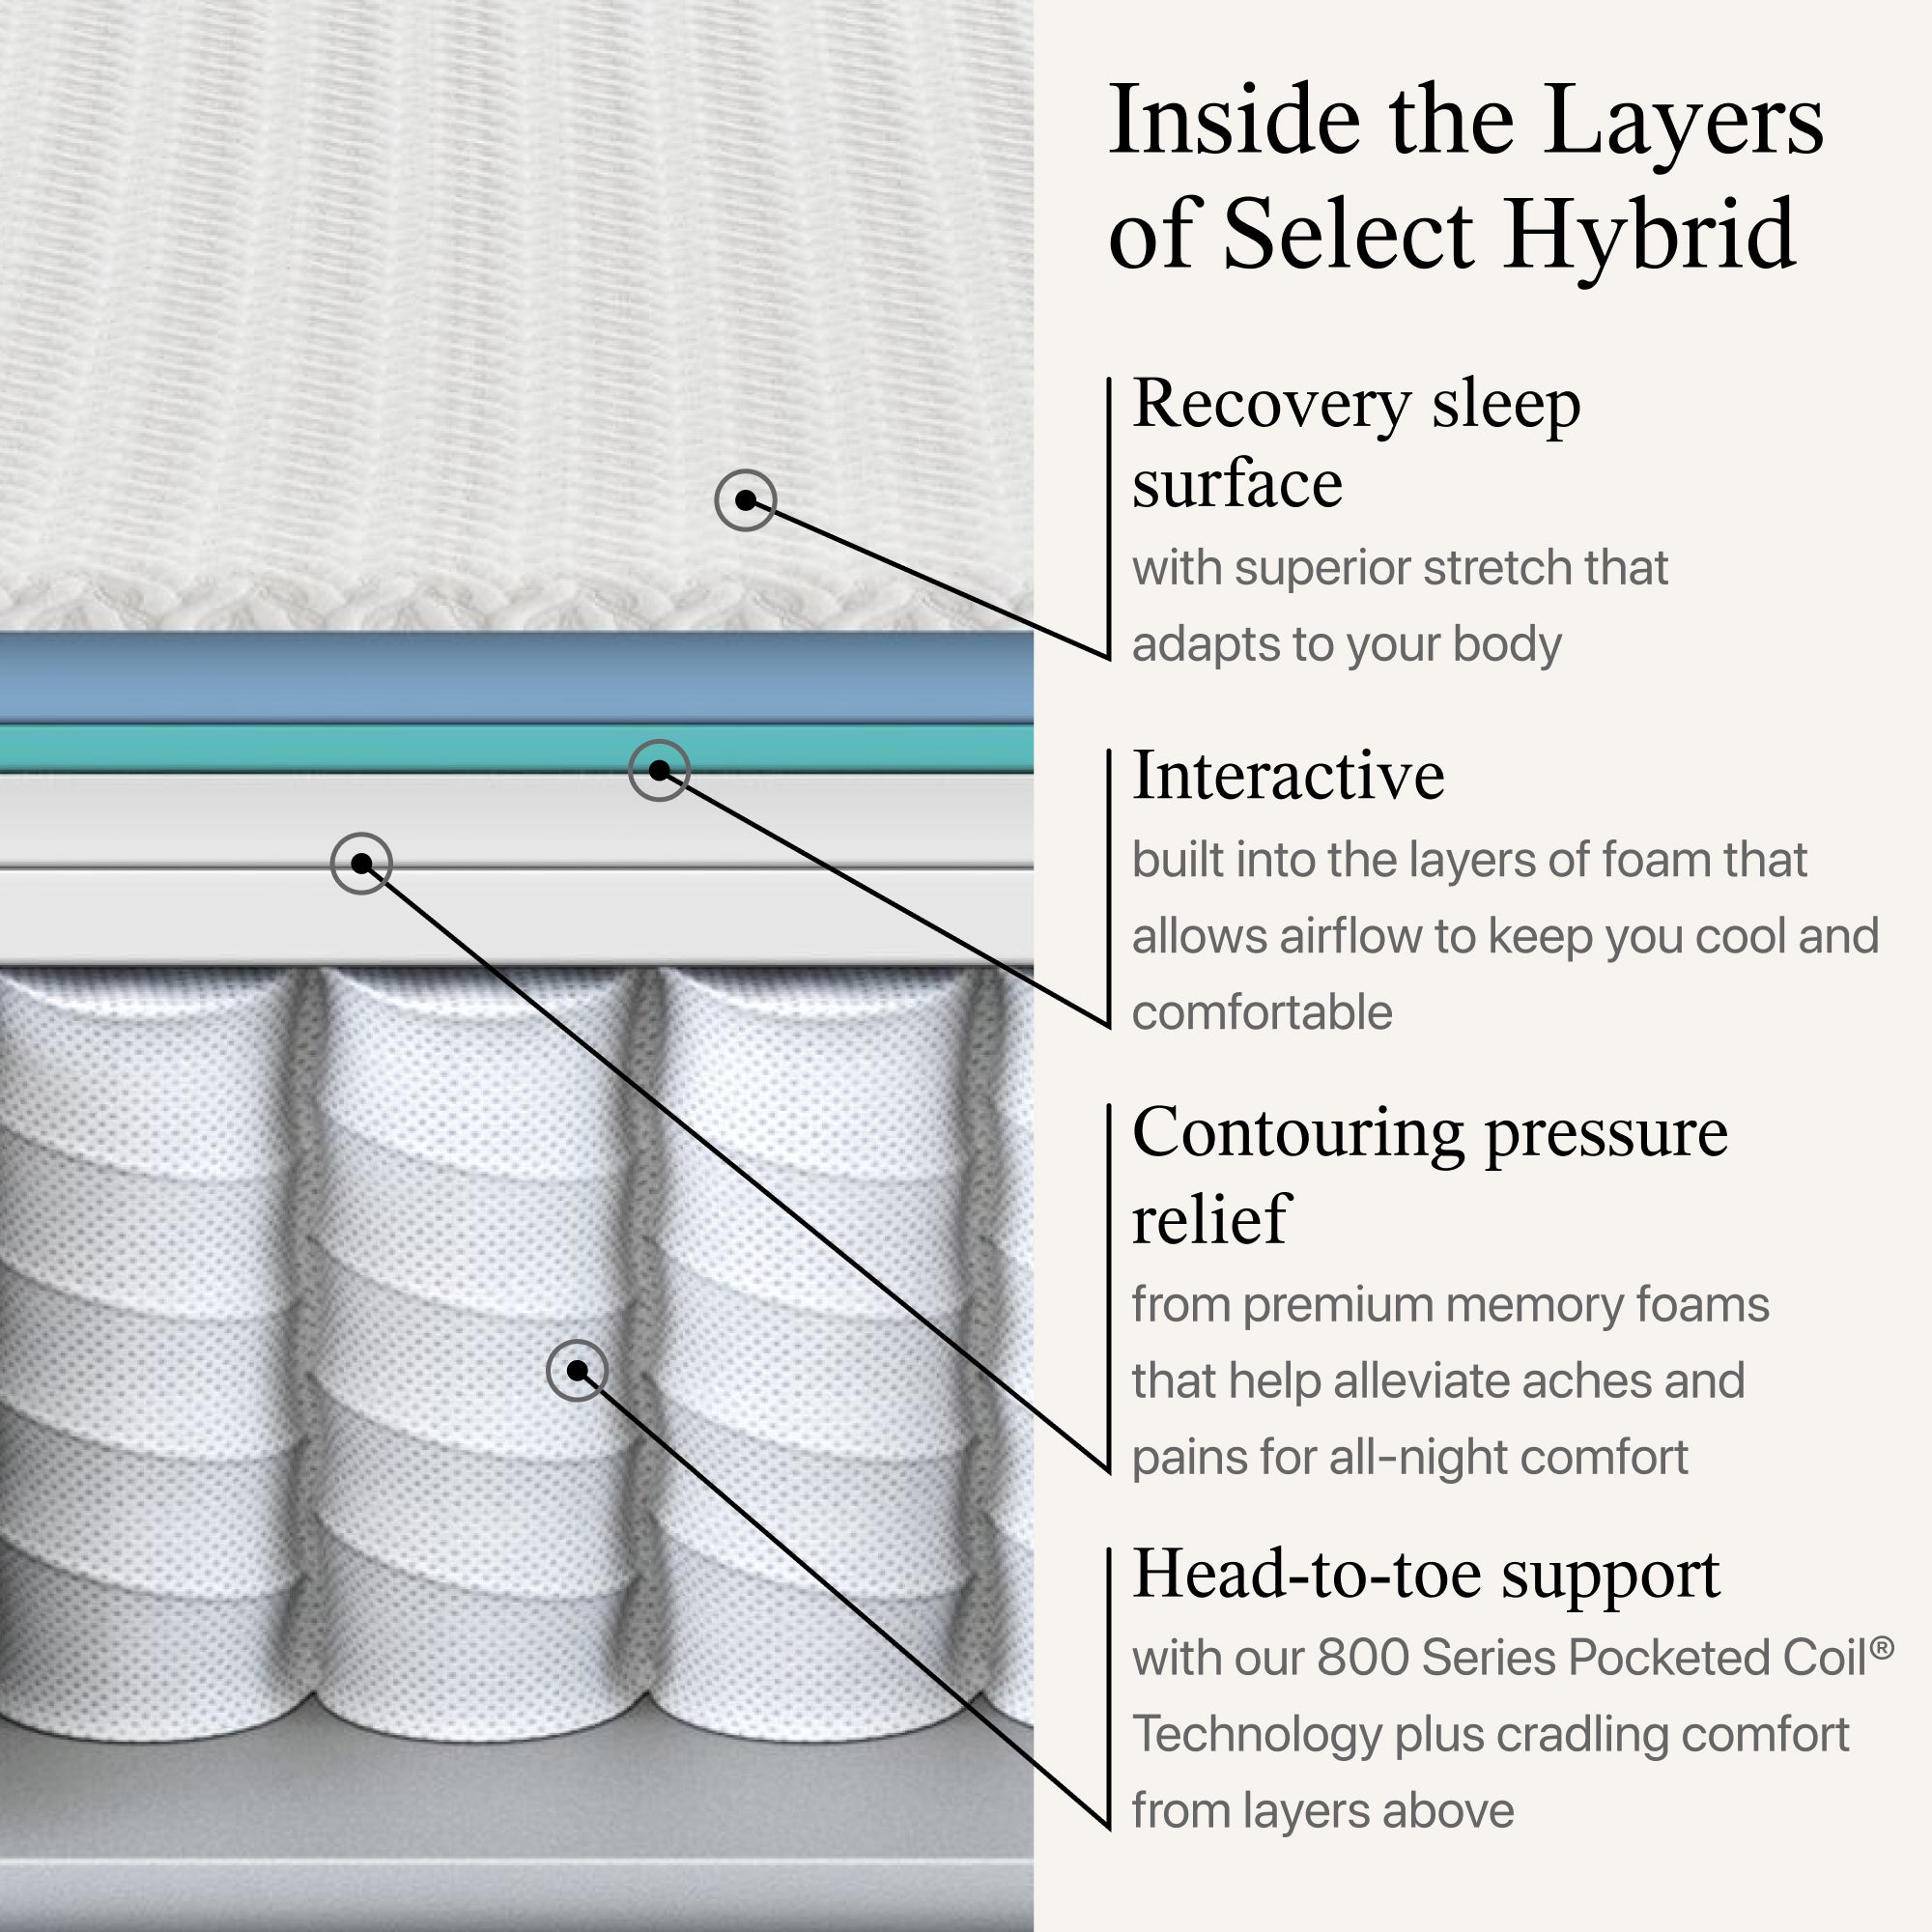 Diagram showing the materials used in the Beautyrest Select hybrid mattress ||feel: Firm